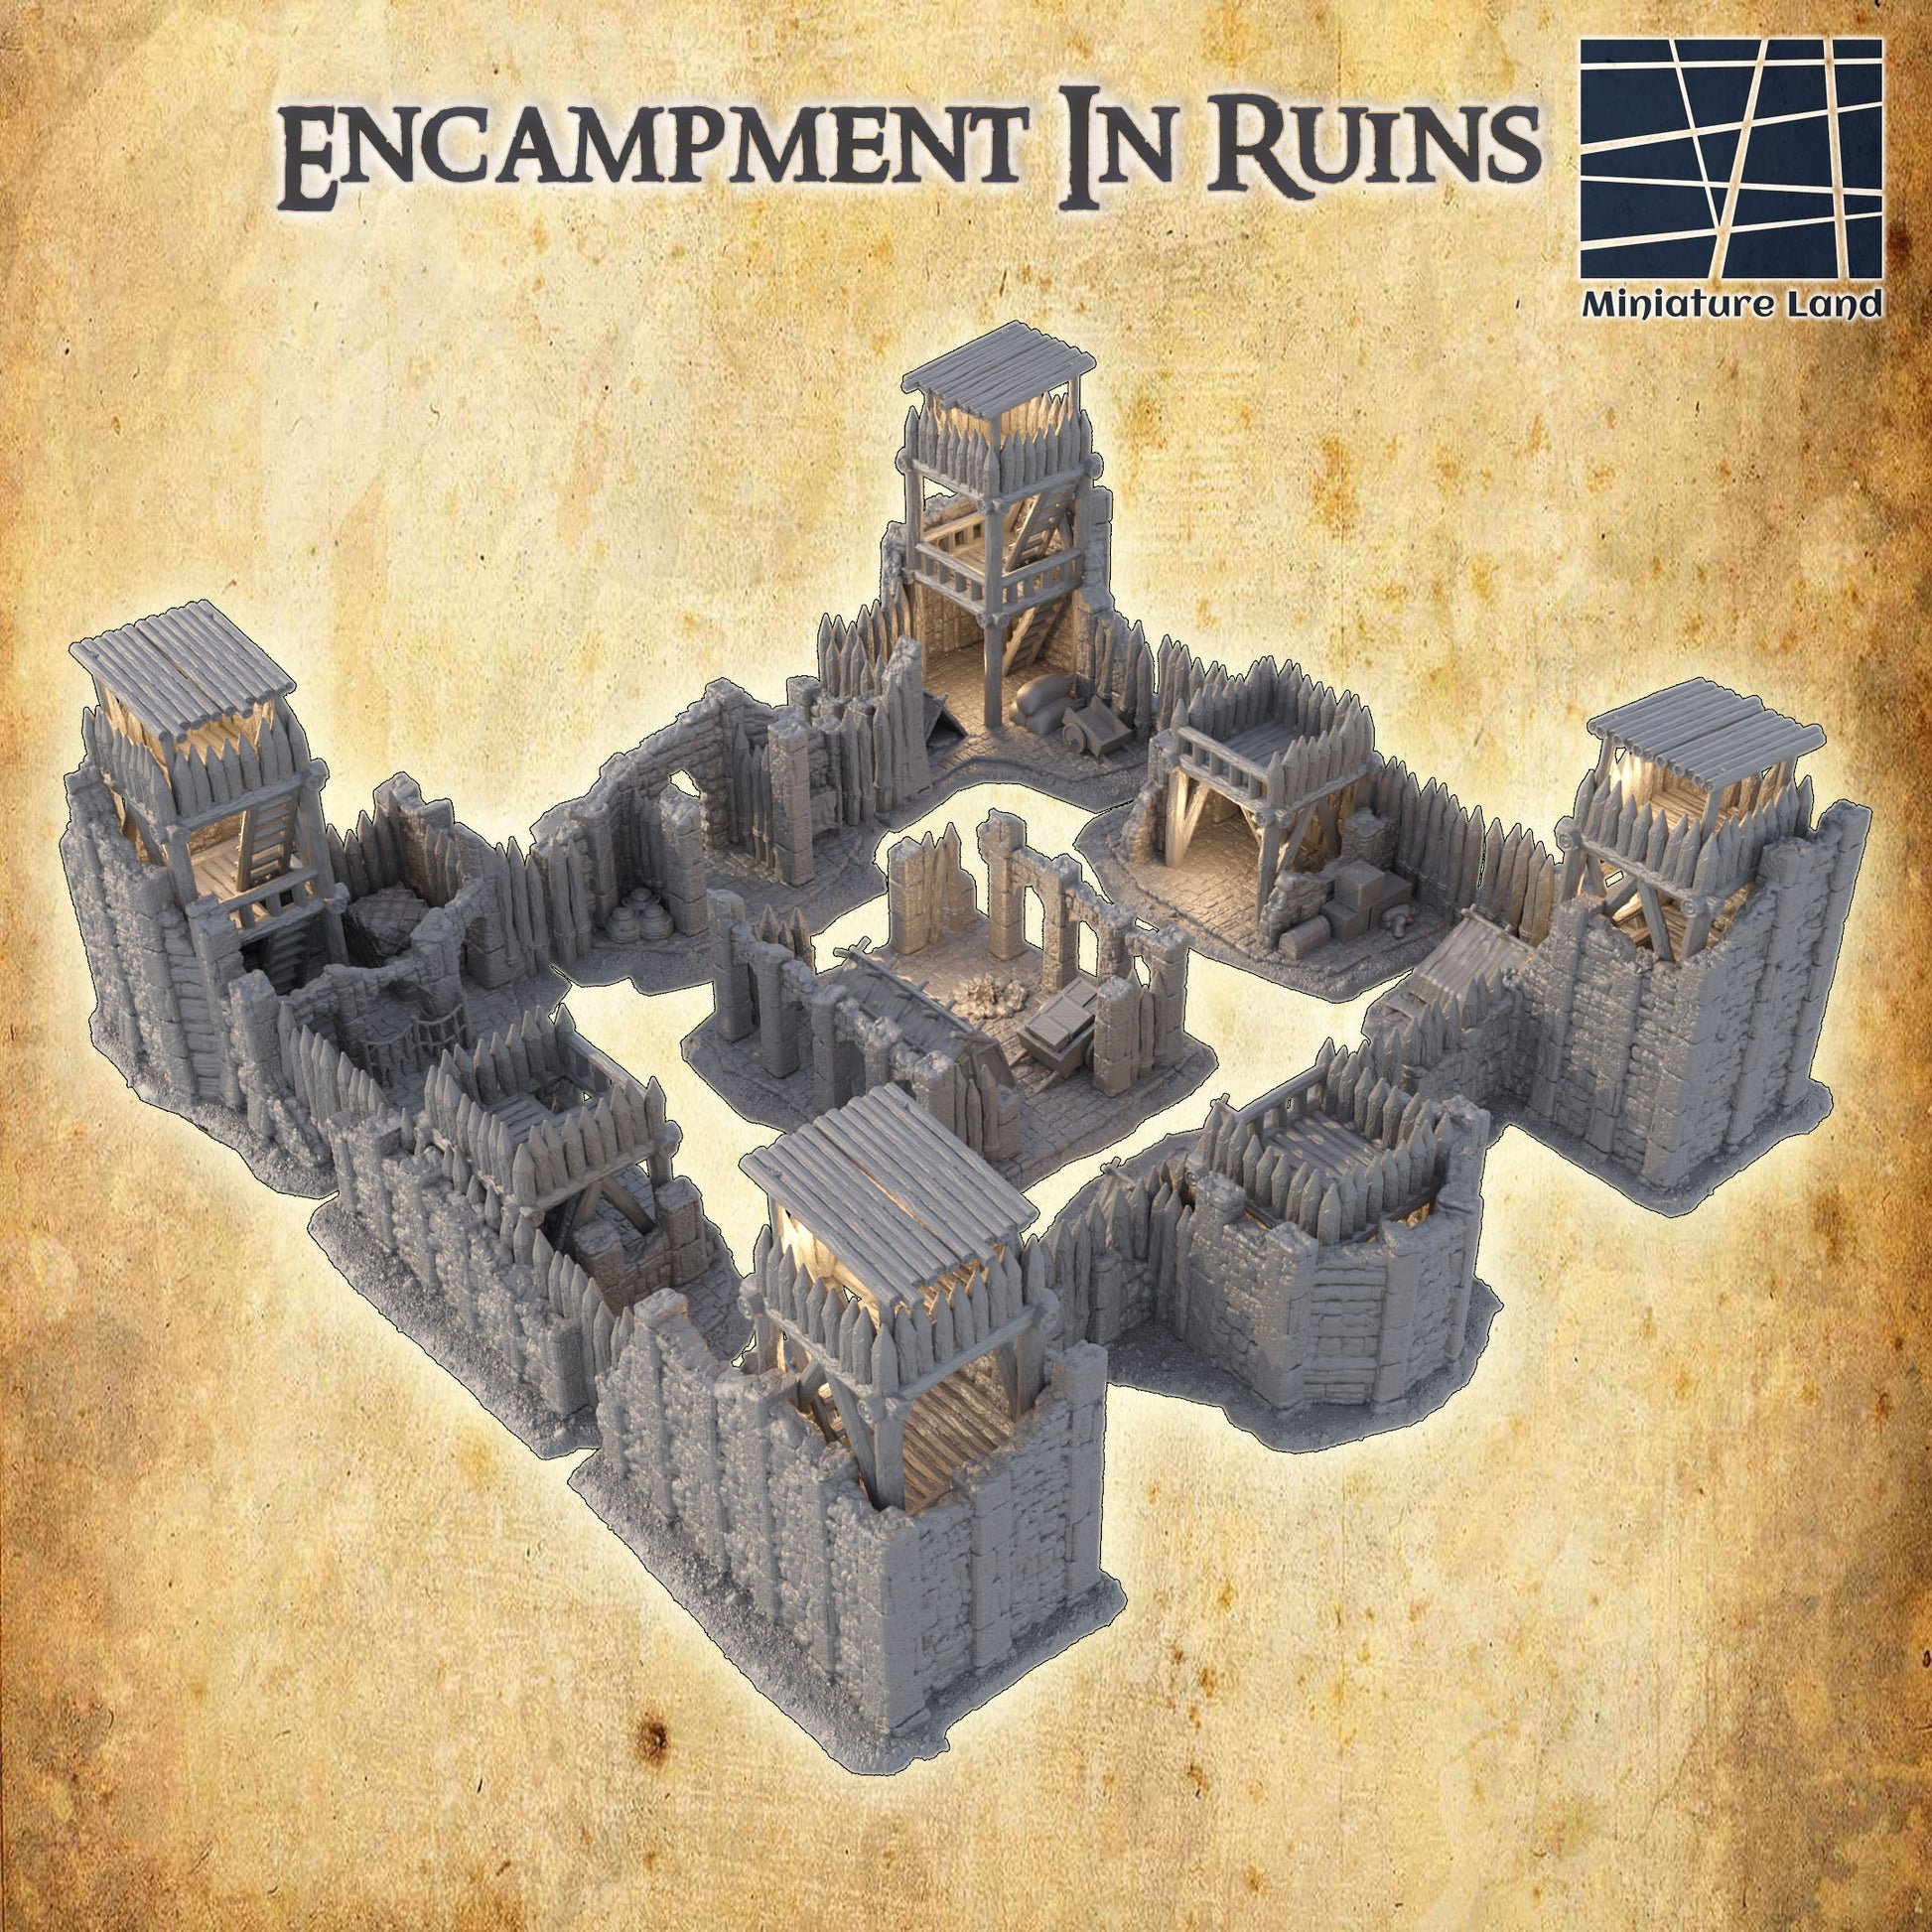 Fortress Ruins, Encampment Ruins, Stronghold